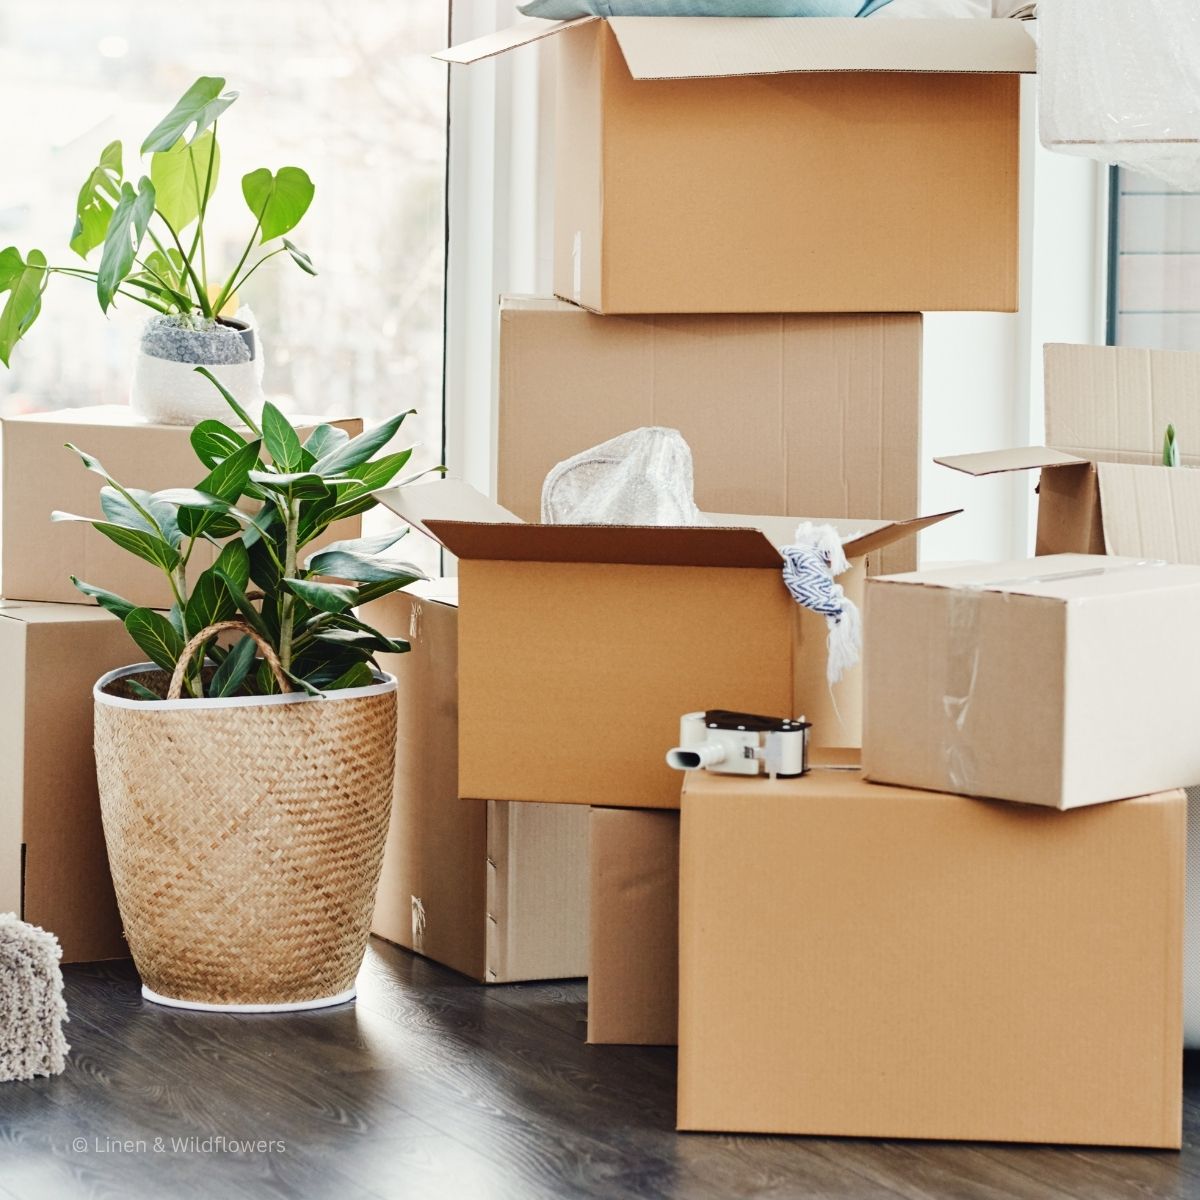 3 Expert Organization Tips For Moving Home + Checklist